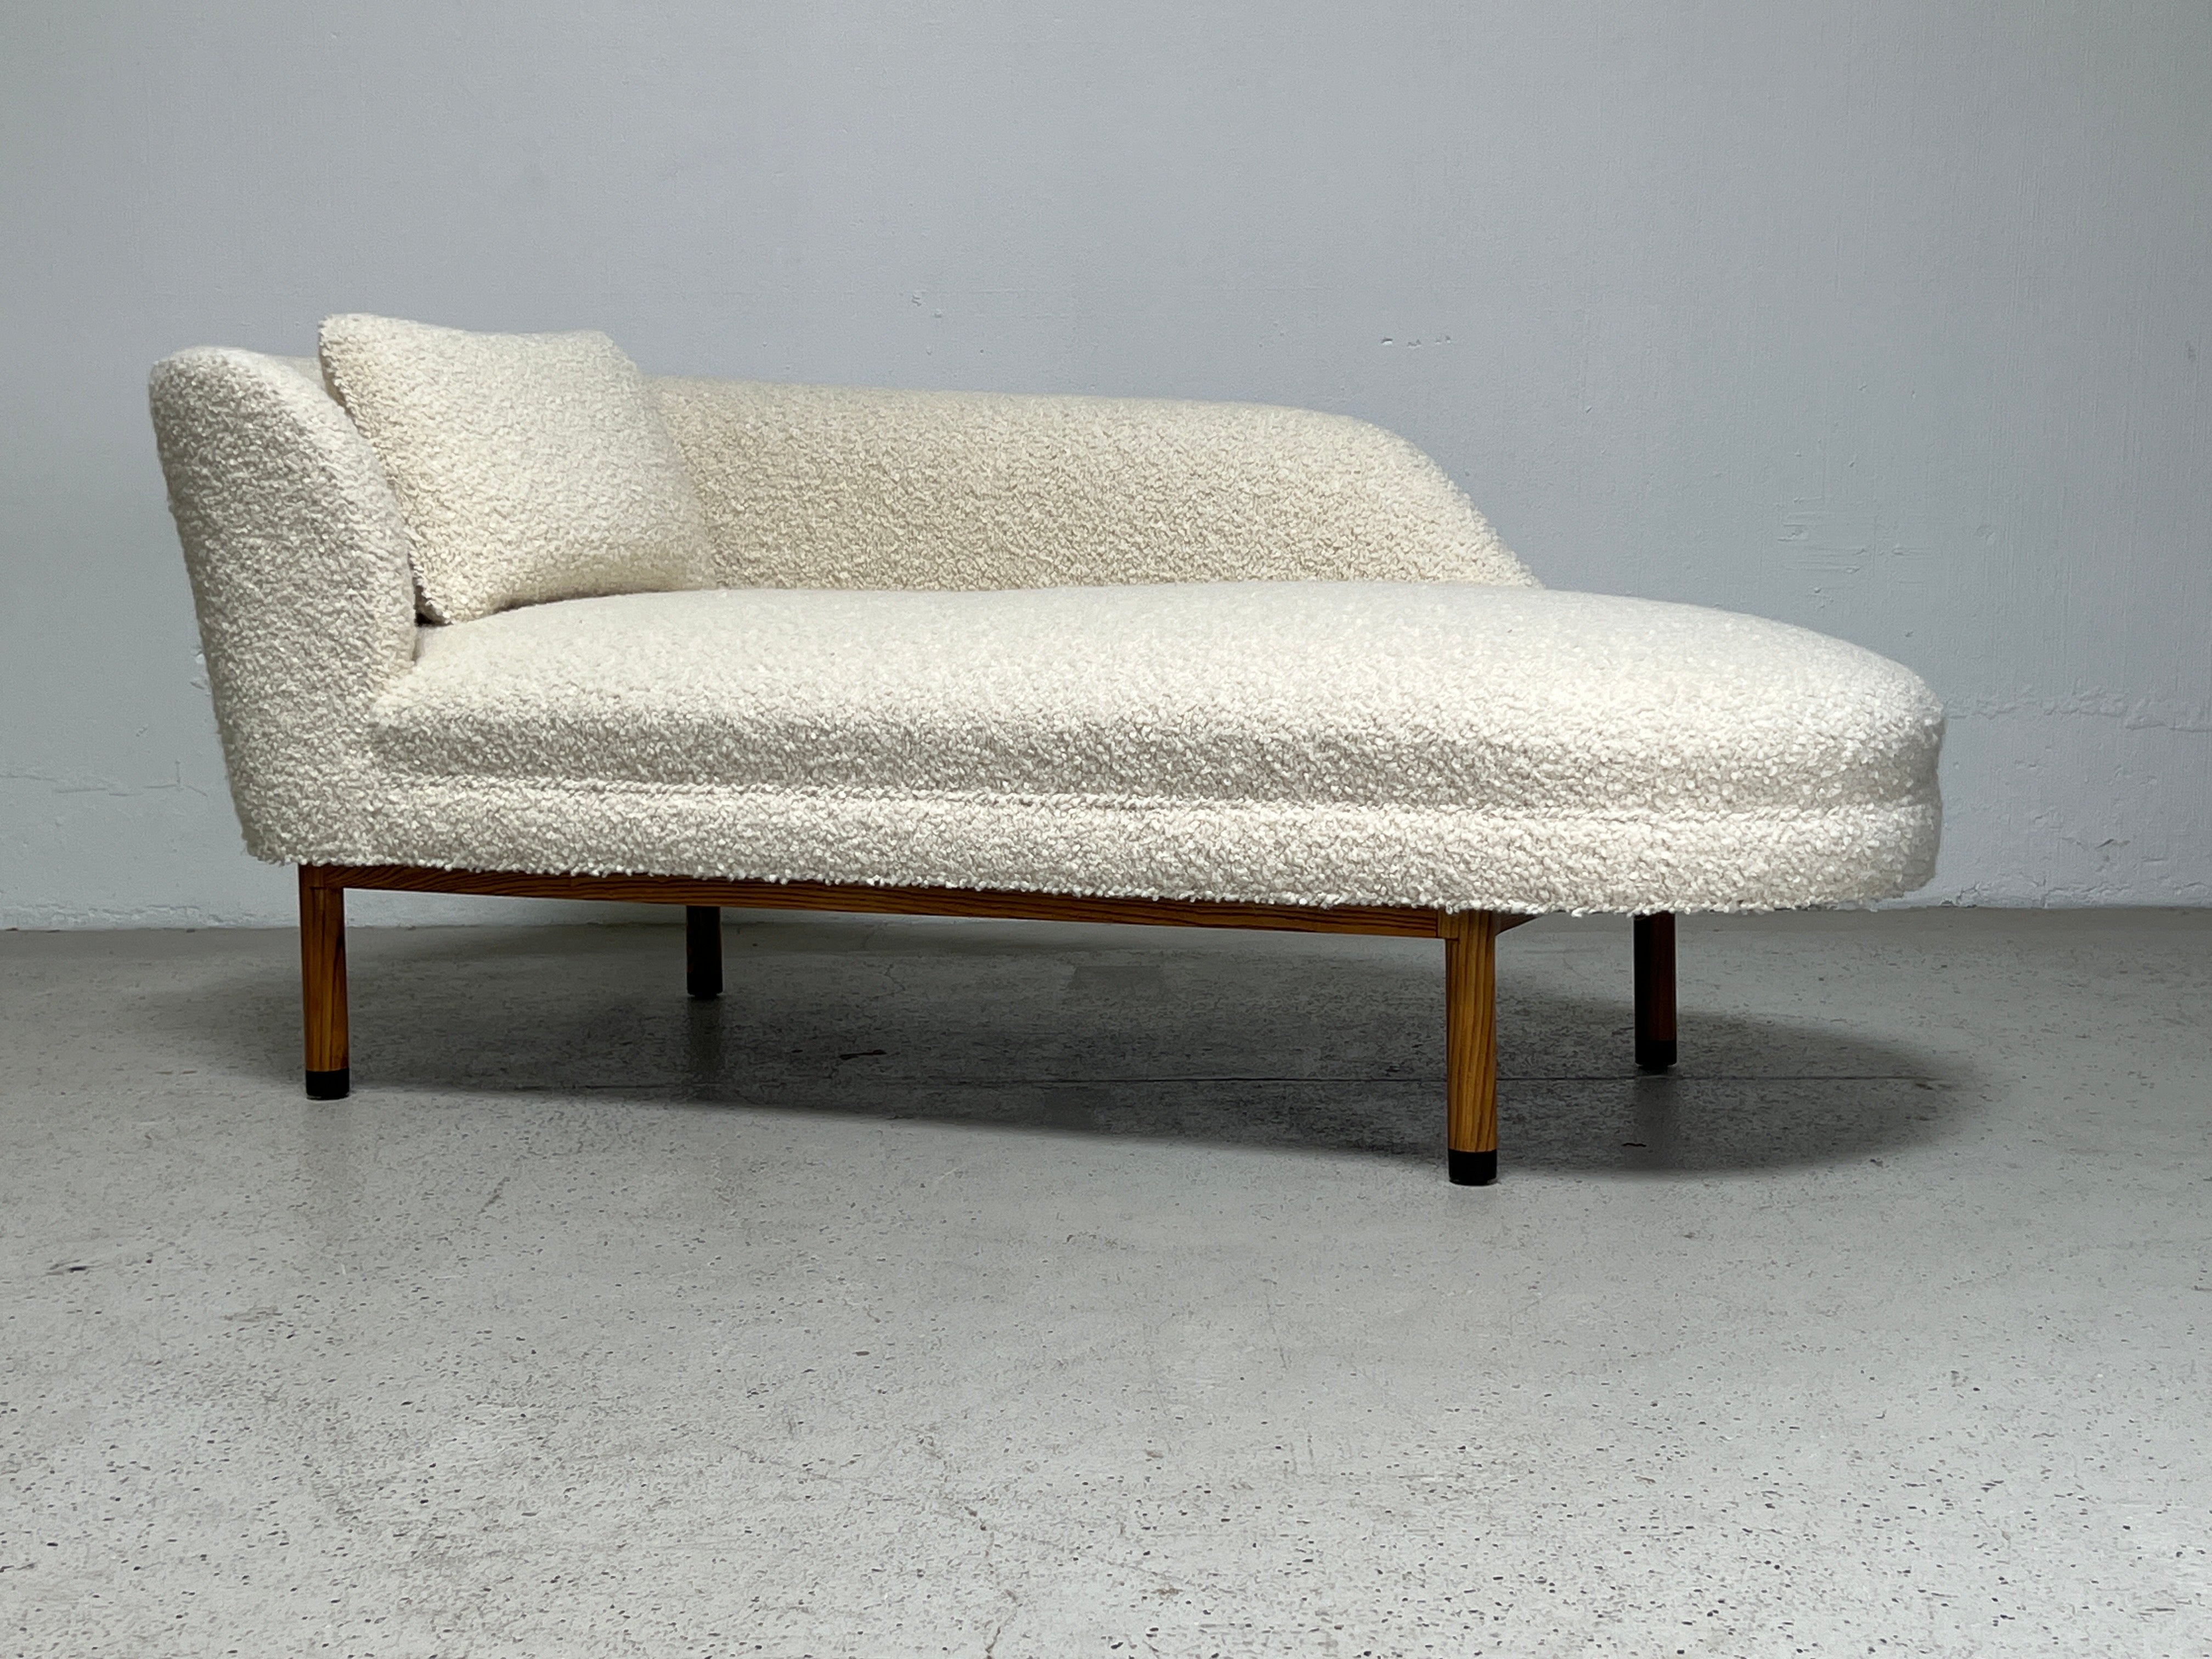 A left arm chaise lounge designed by Edward Wormley for Dunbar. Ash base with Ebony feet. Fully restored and upholstered in Holly Hunt / Teddy / Winter White. Matching right arm chaise also available. 